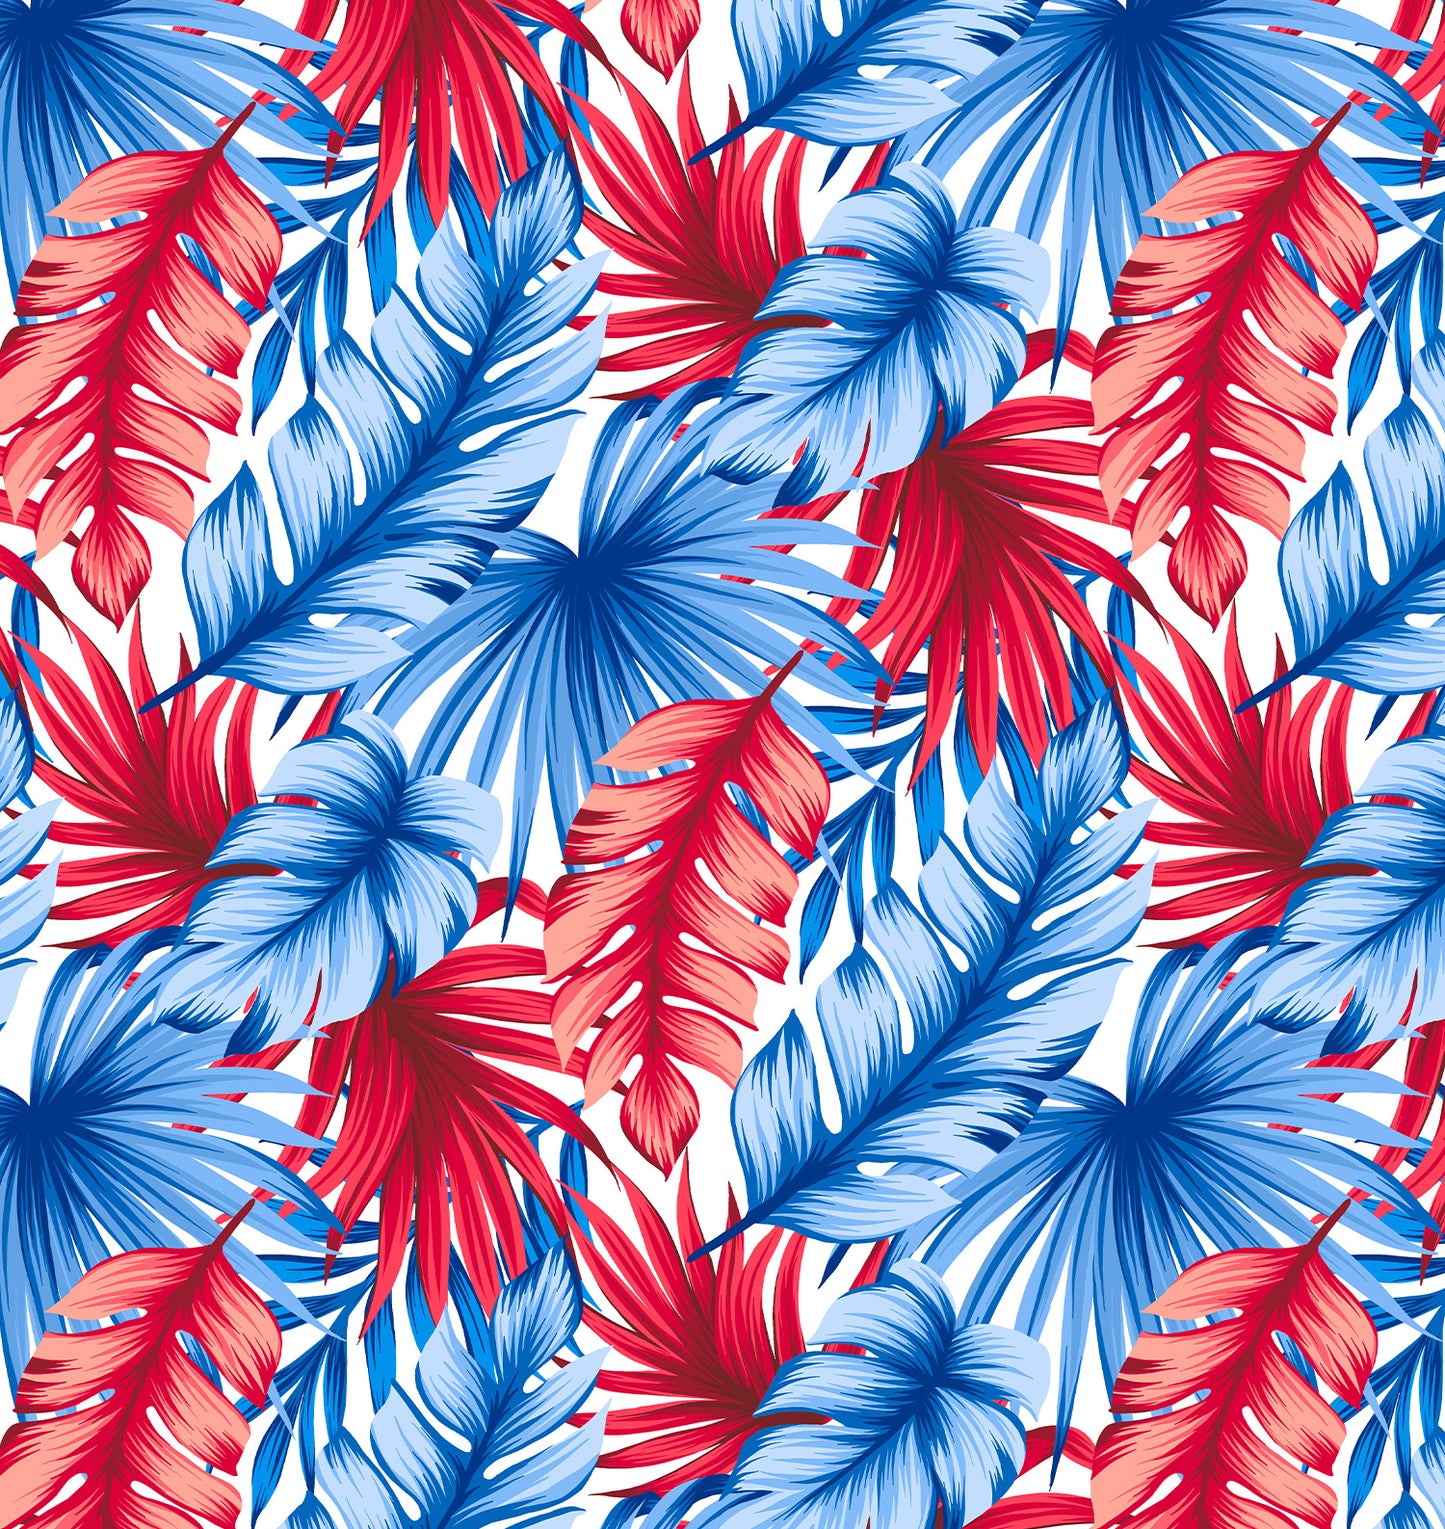 American Dream swimsuit print with red, white, and blue palm leaves